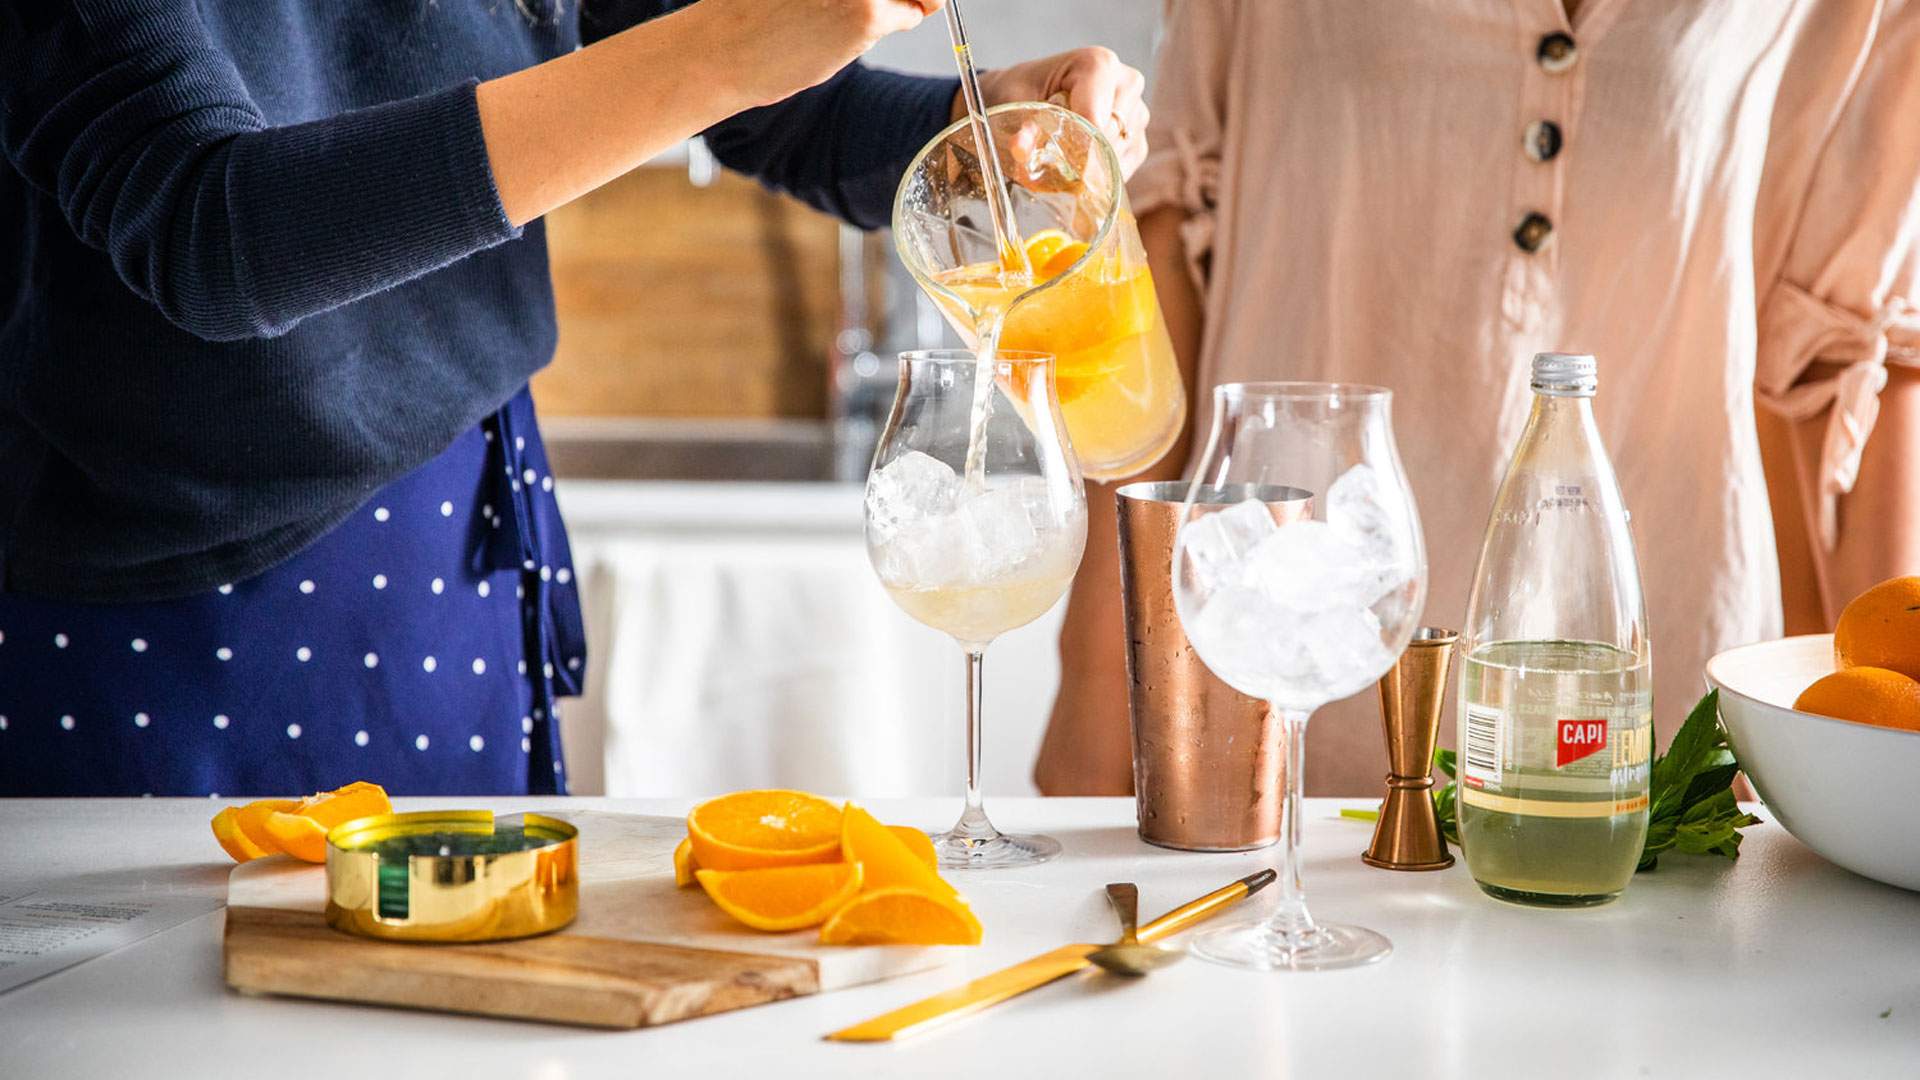 This New Australian Drinks Service Delivers a Heap of Cocktails to Your Door Each Month